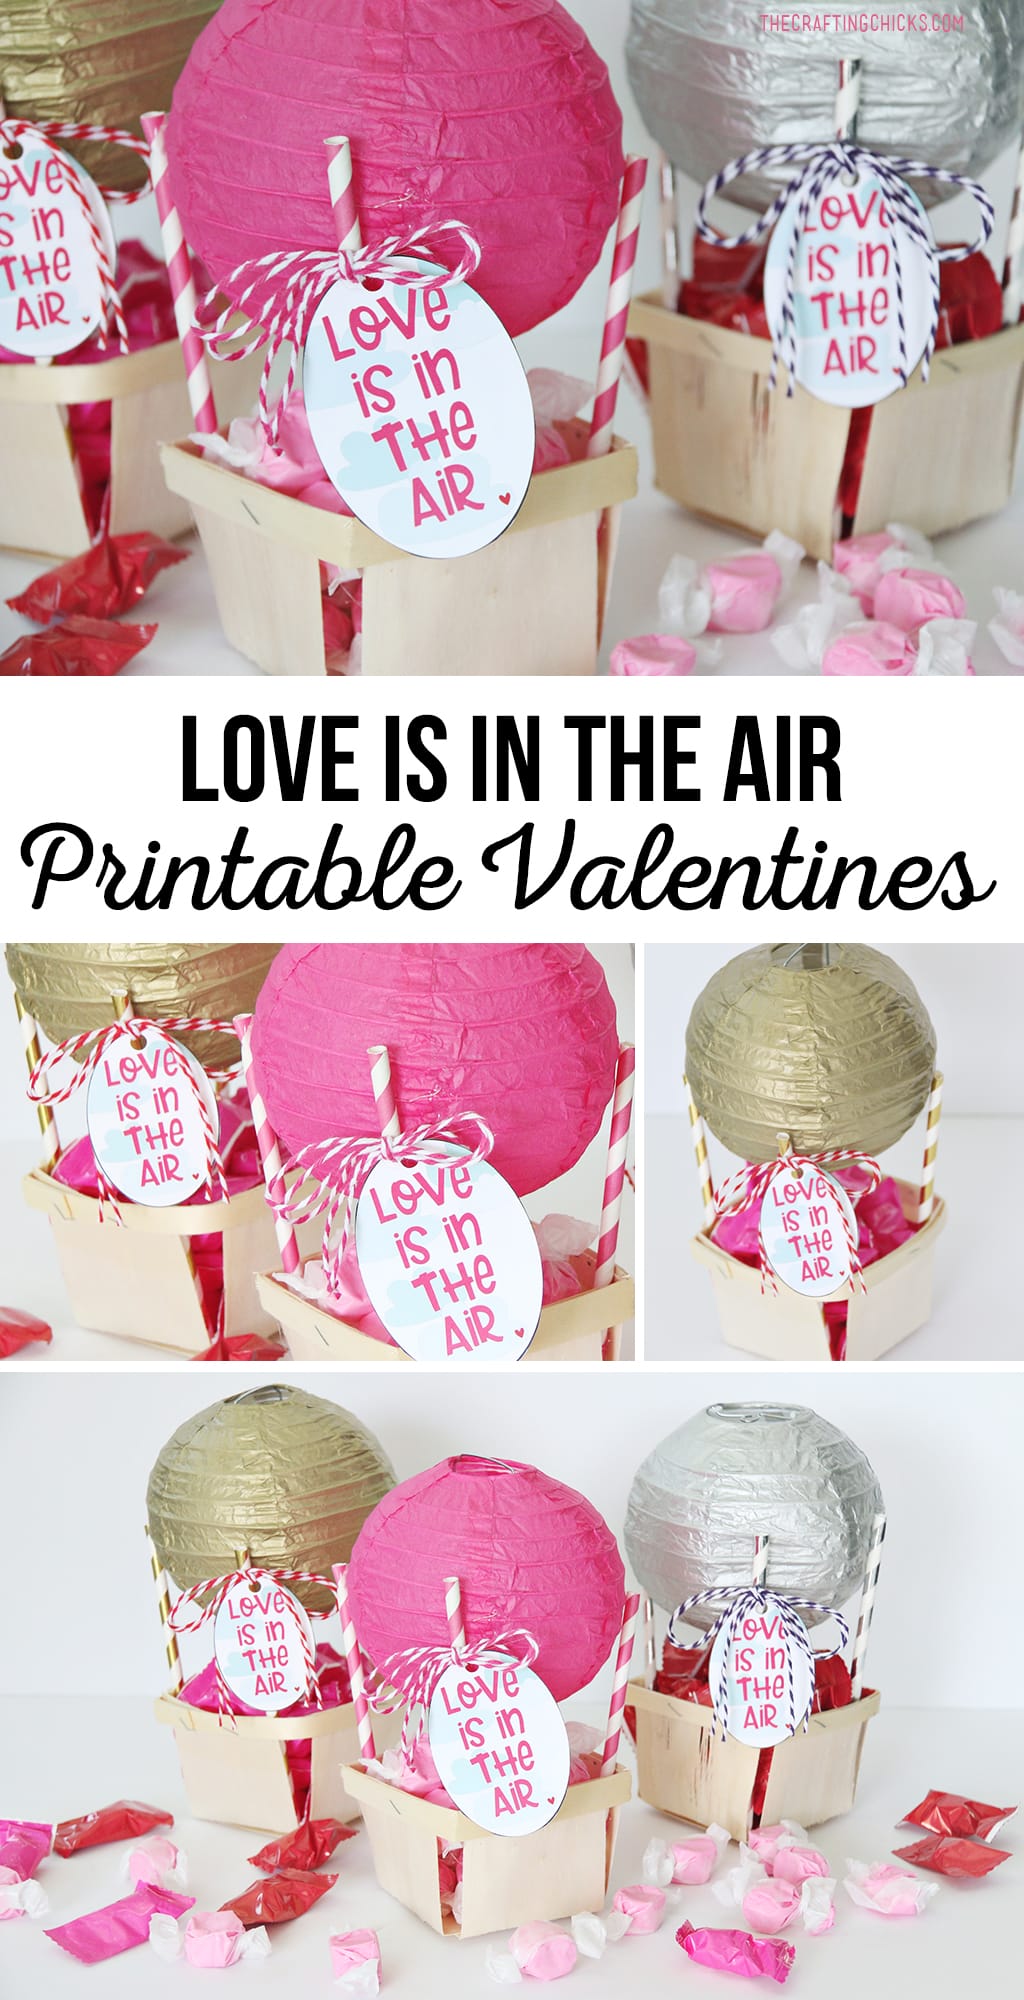 Love Is In the Air Printable Valentine